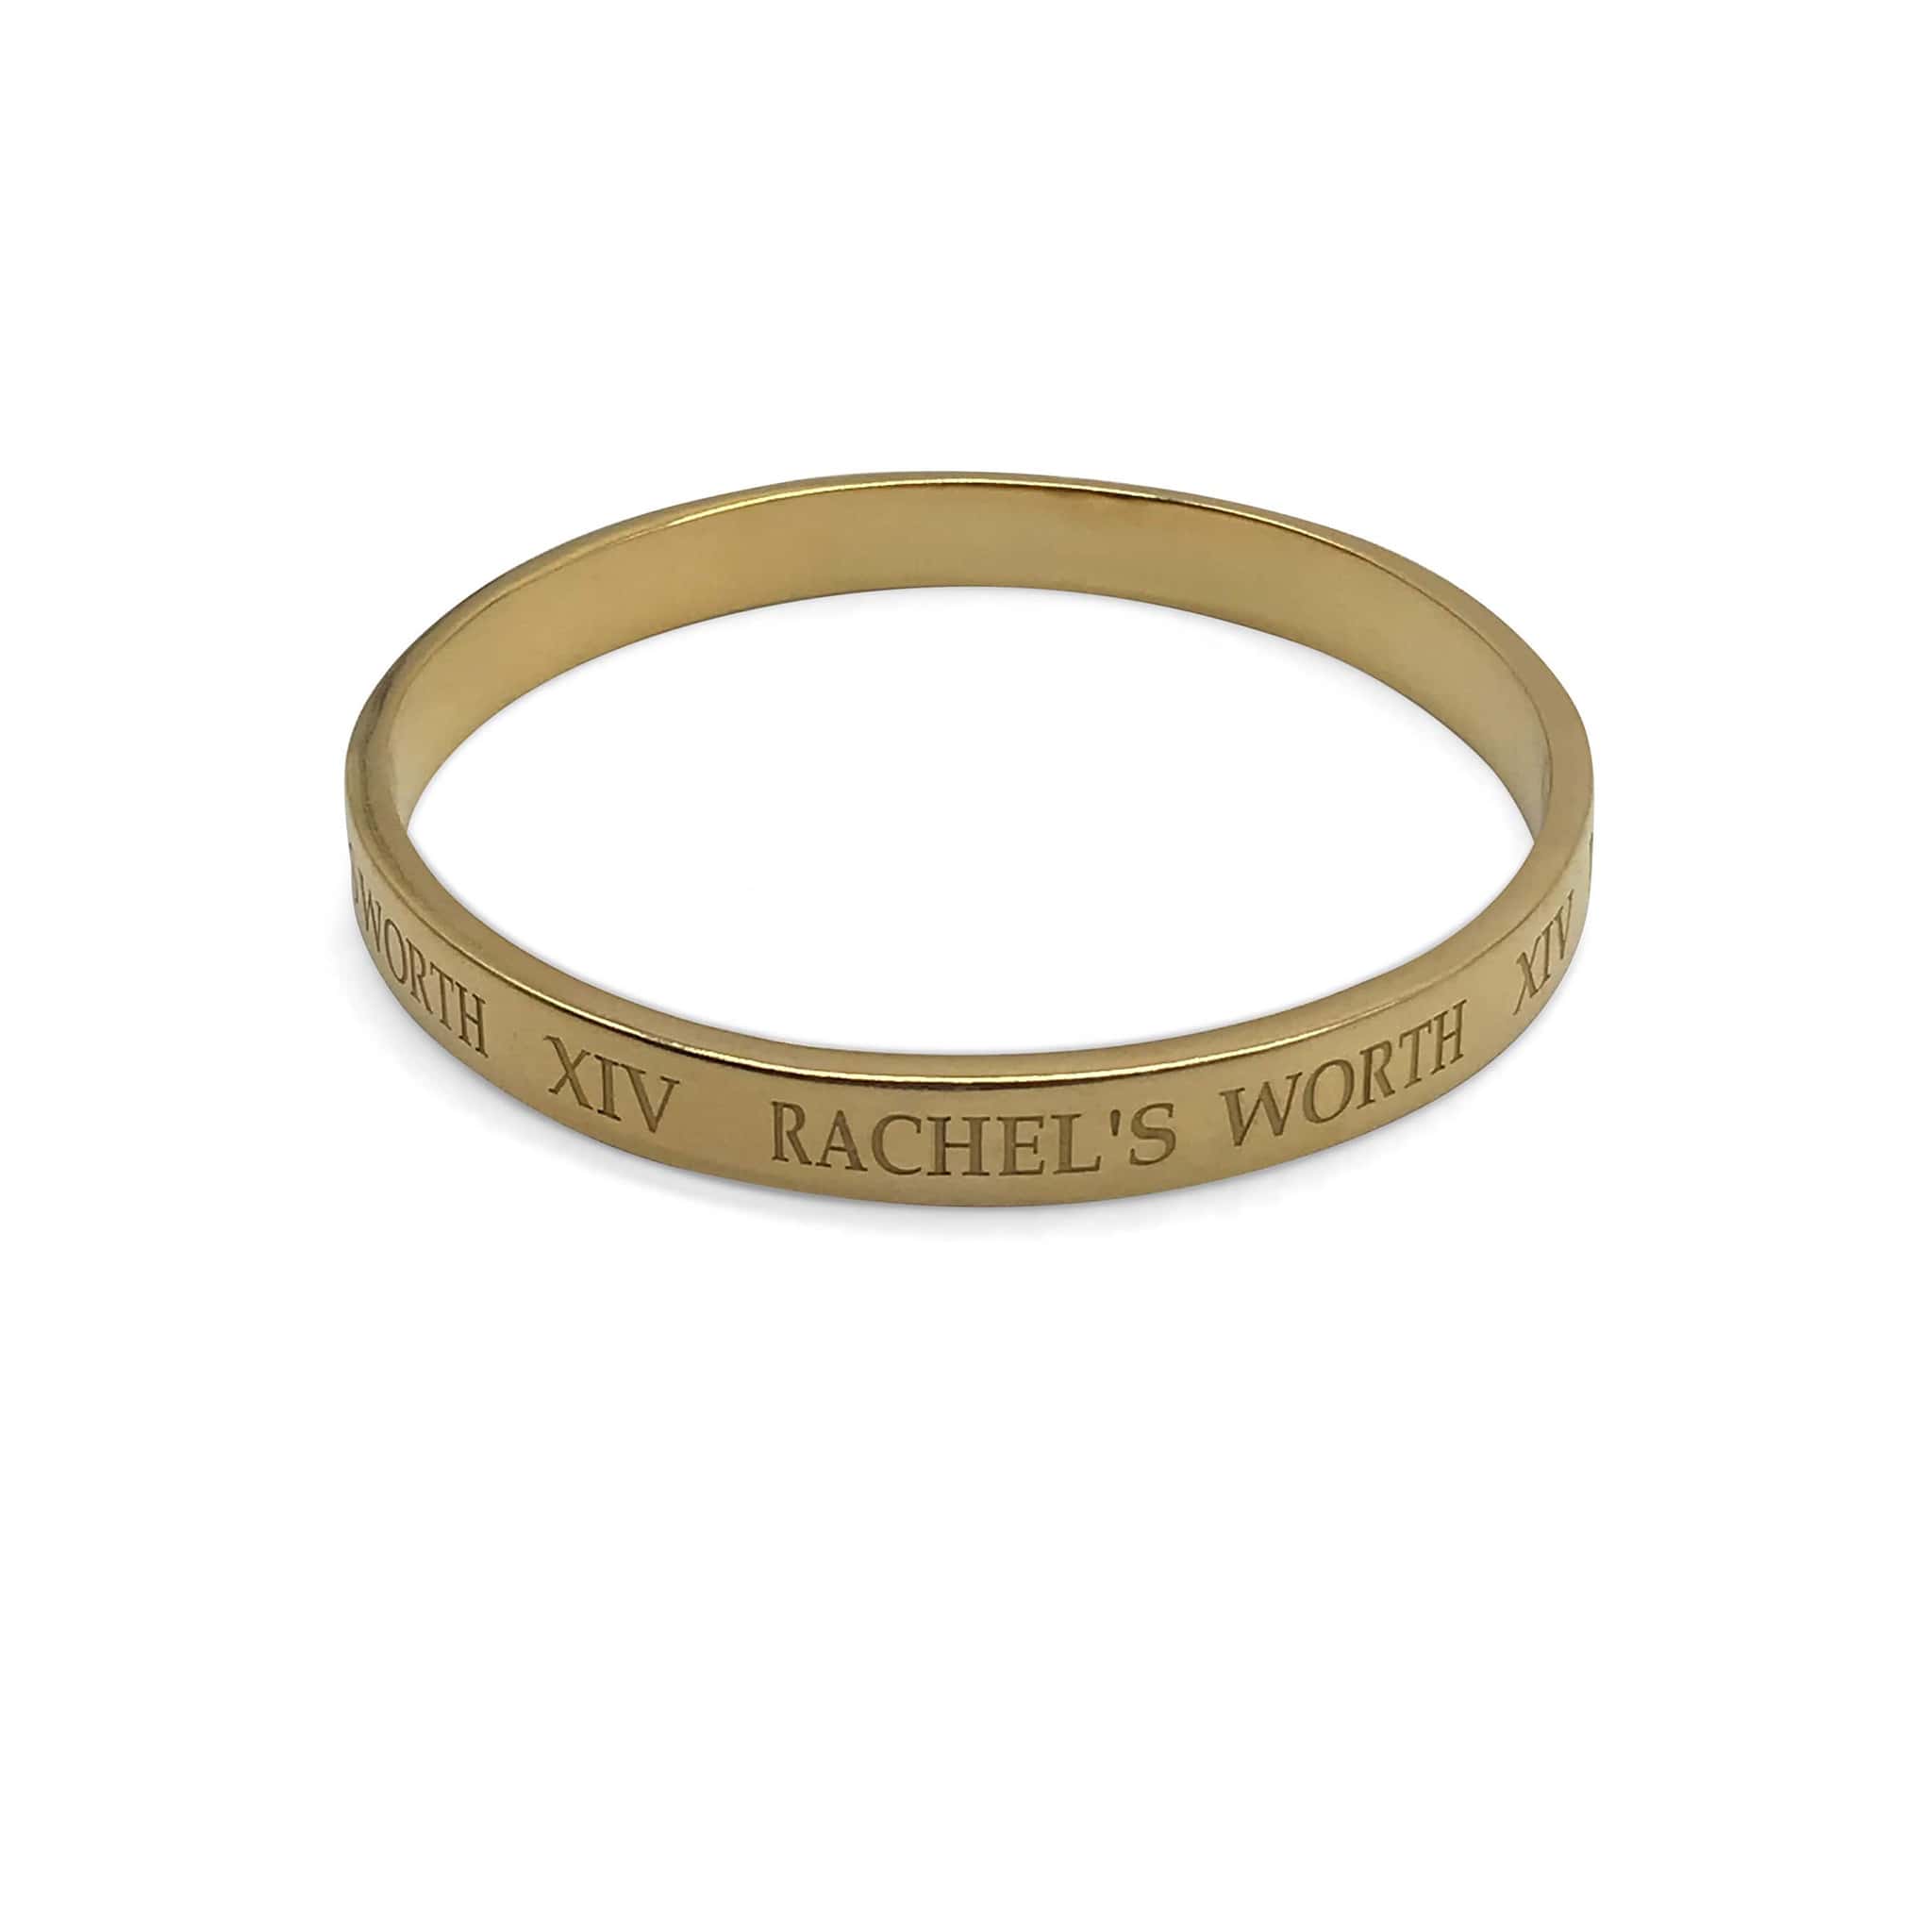 Rachel's Worth® Official Website - Jewelry and Apparel